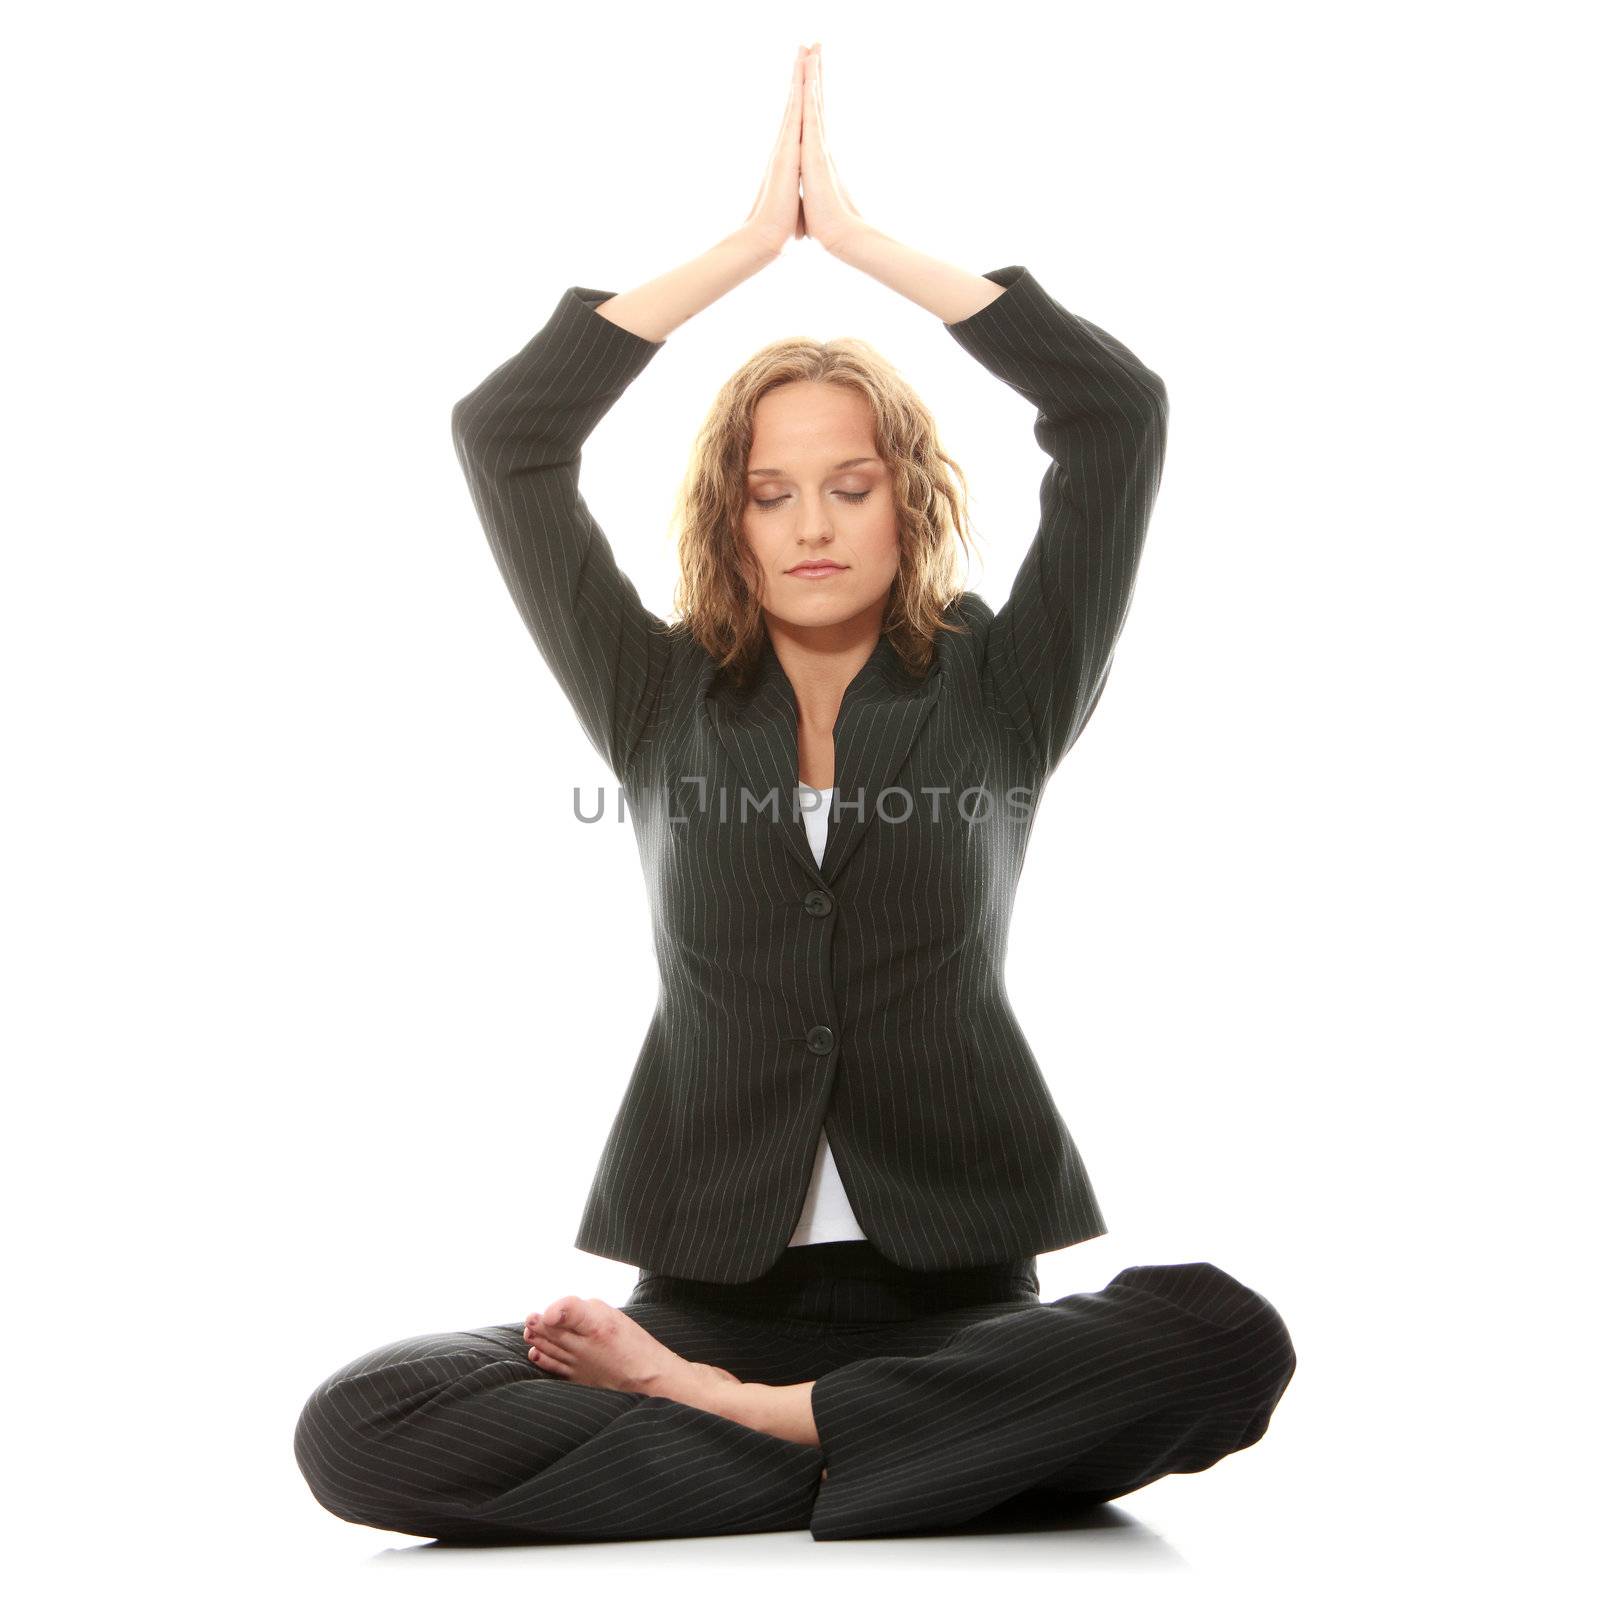 Beautiful businesswoman sitting on white desk in lotus flower position of yoga. Isolated on white